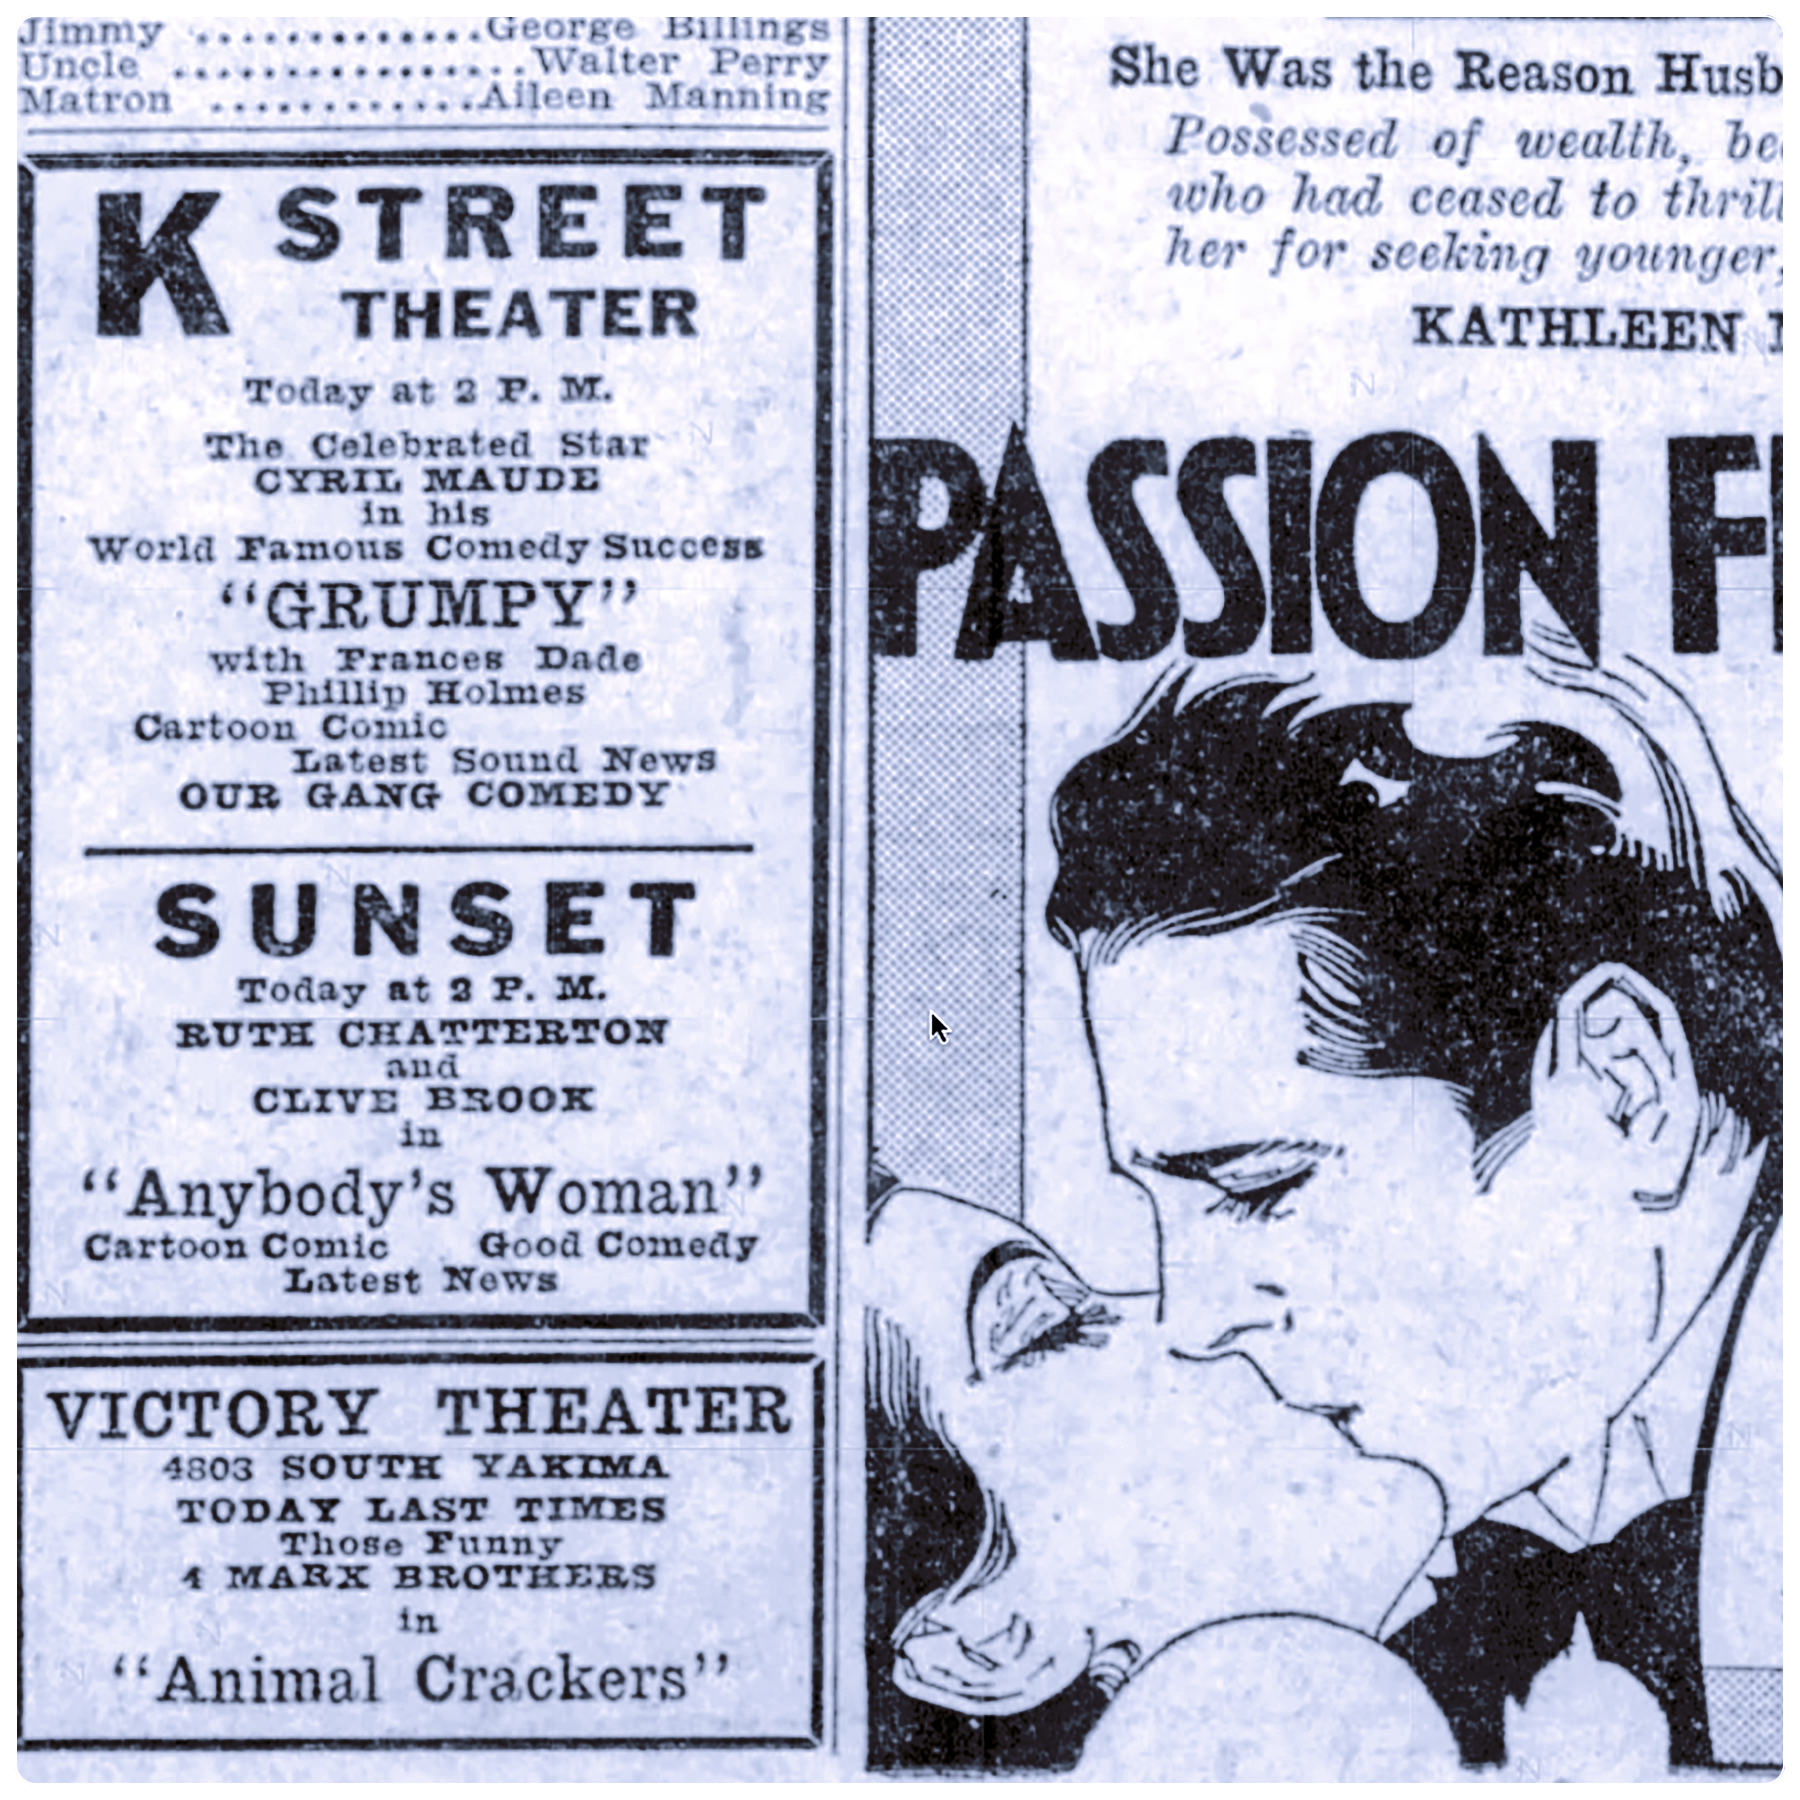 Ad during the Victory Theater period